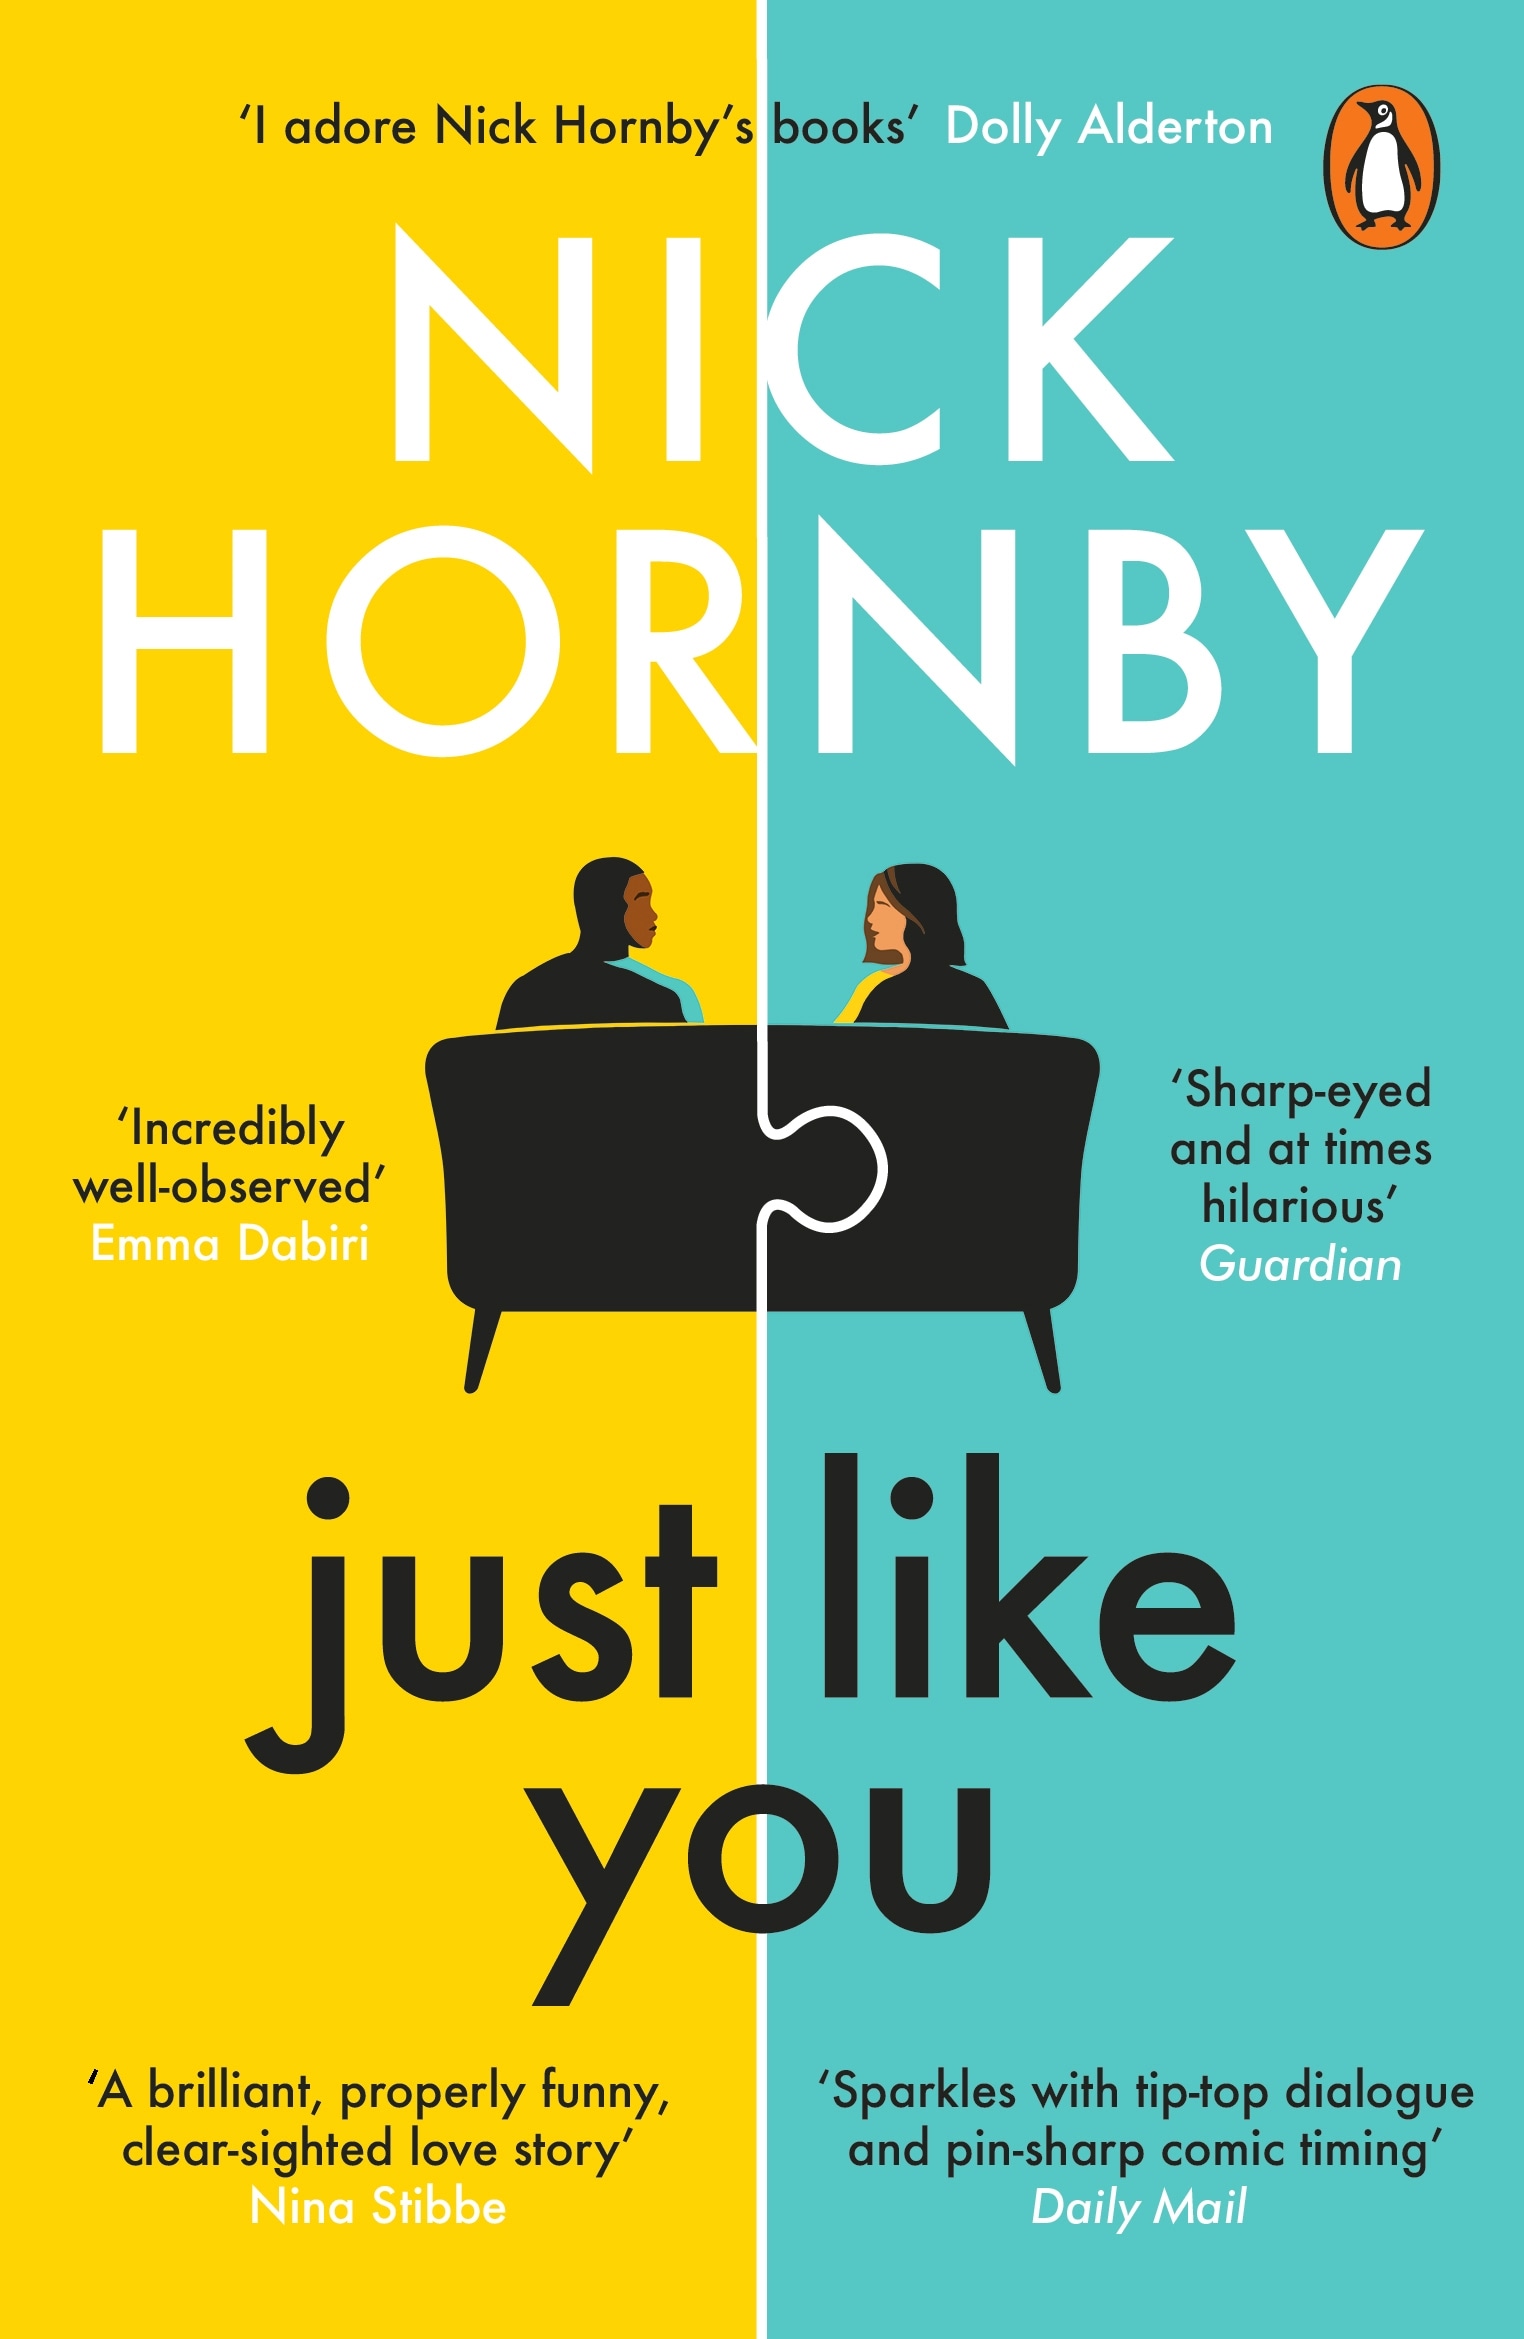 Book “Just Like You” by Nick Hornby — April 15, 2021